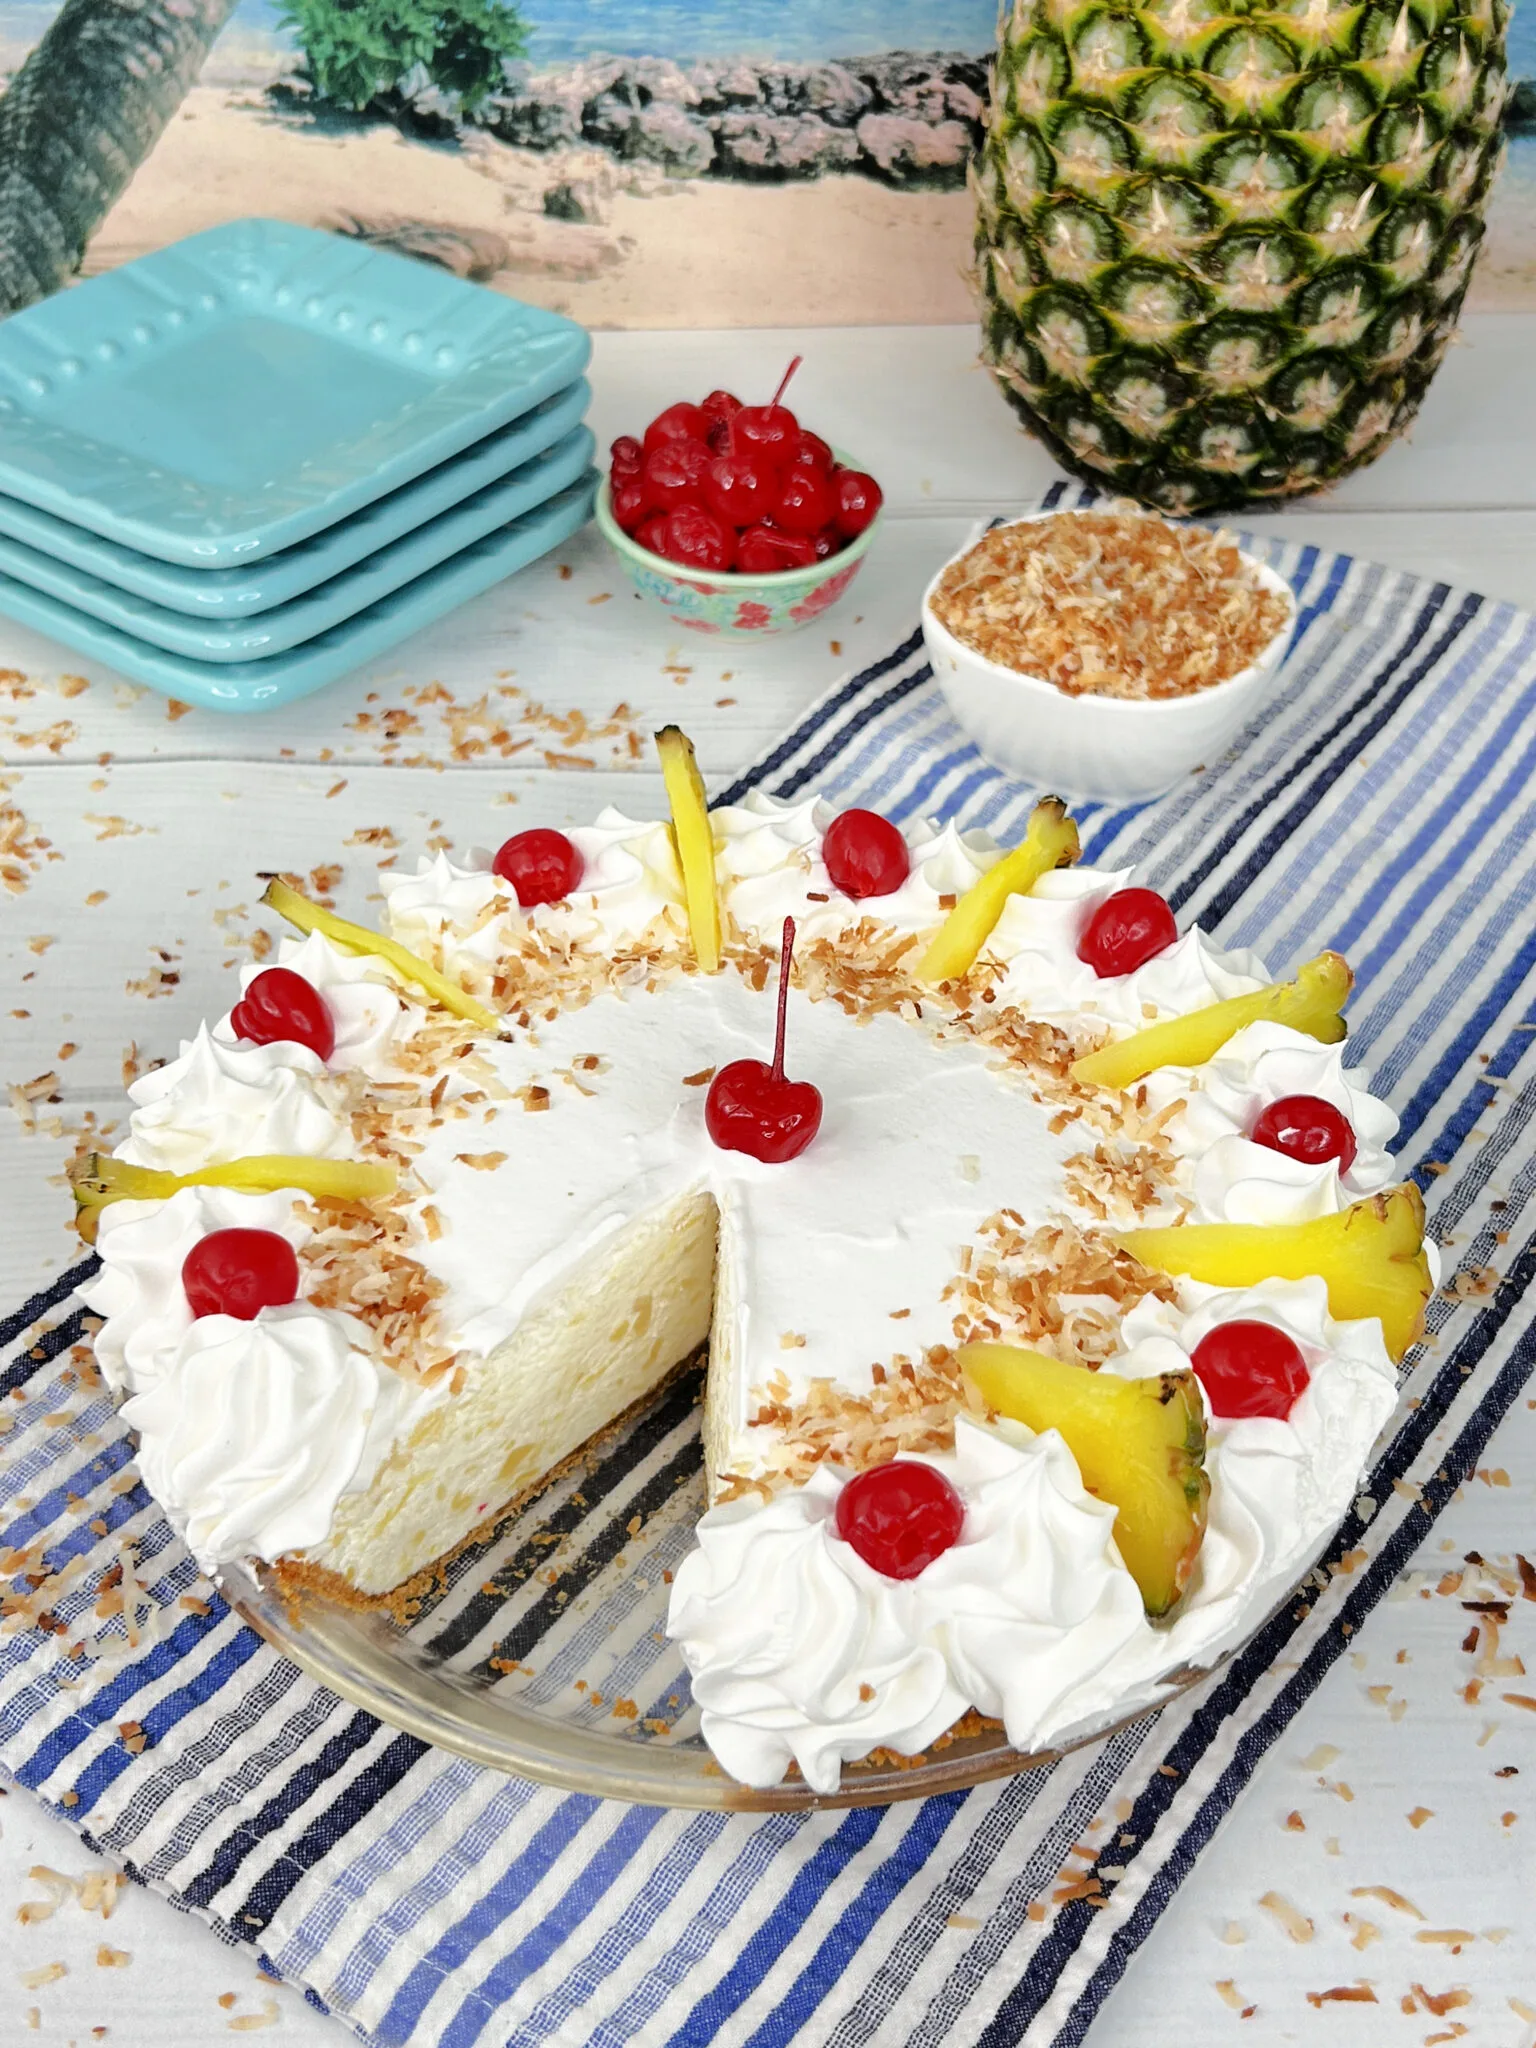 Pina colada pie with one slice missing in a glass pie plate.  The pie is garnished with whipped cream, toasted coconut, slices of pineapple, and maraschino cherries.